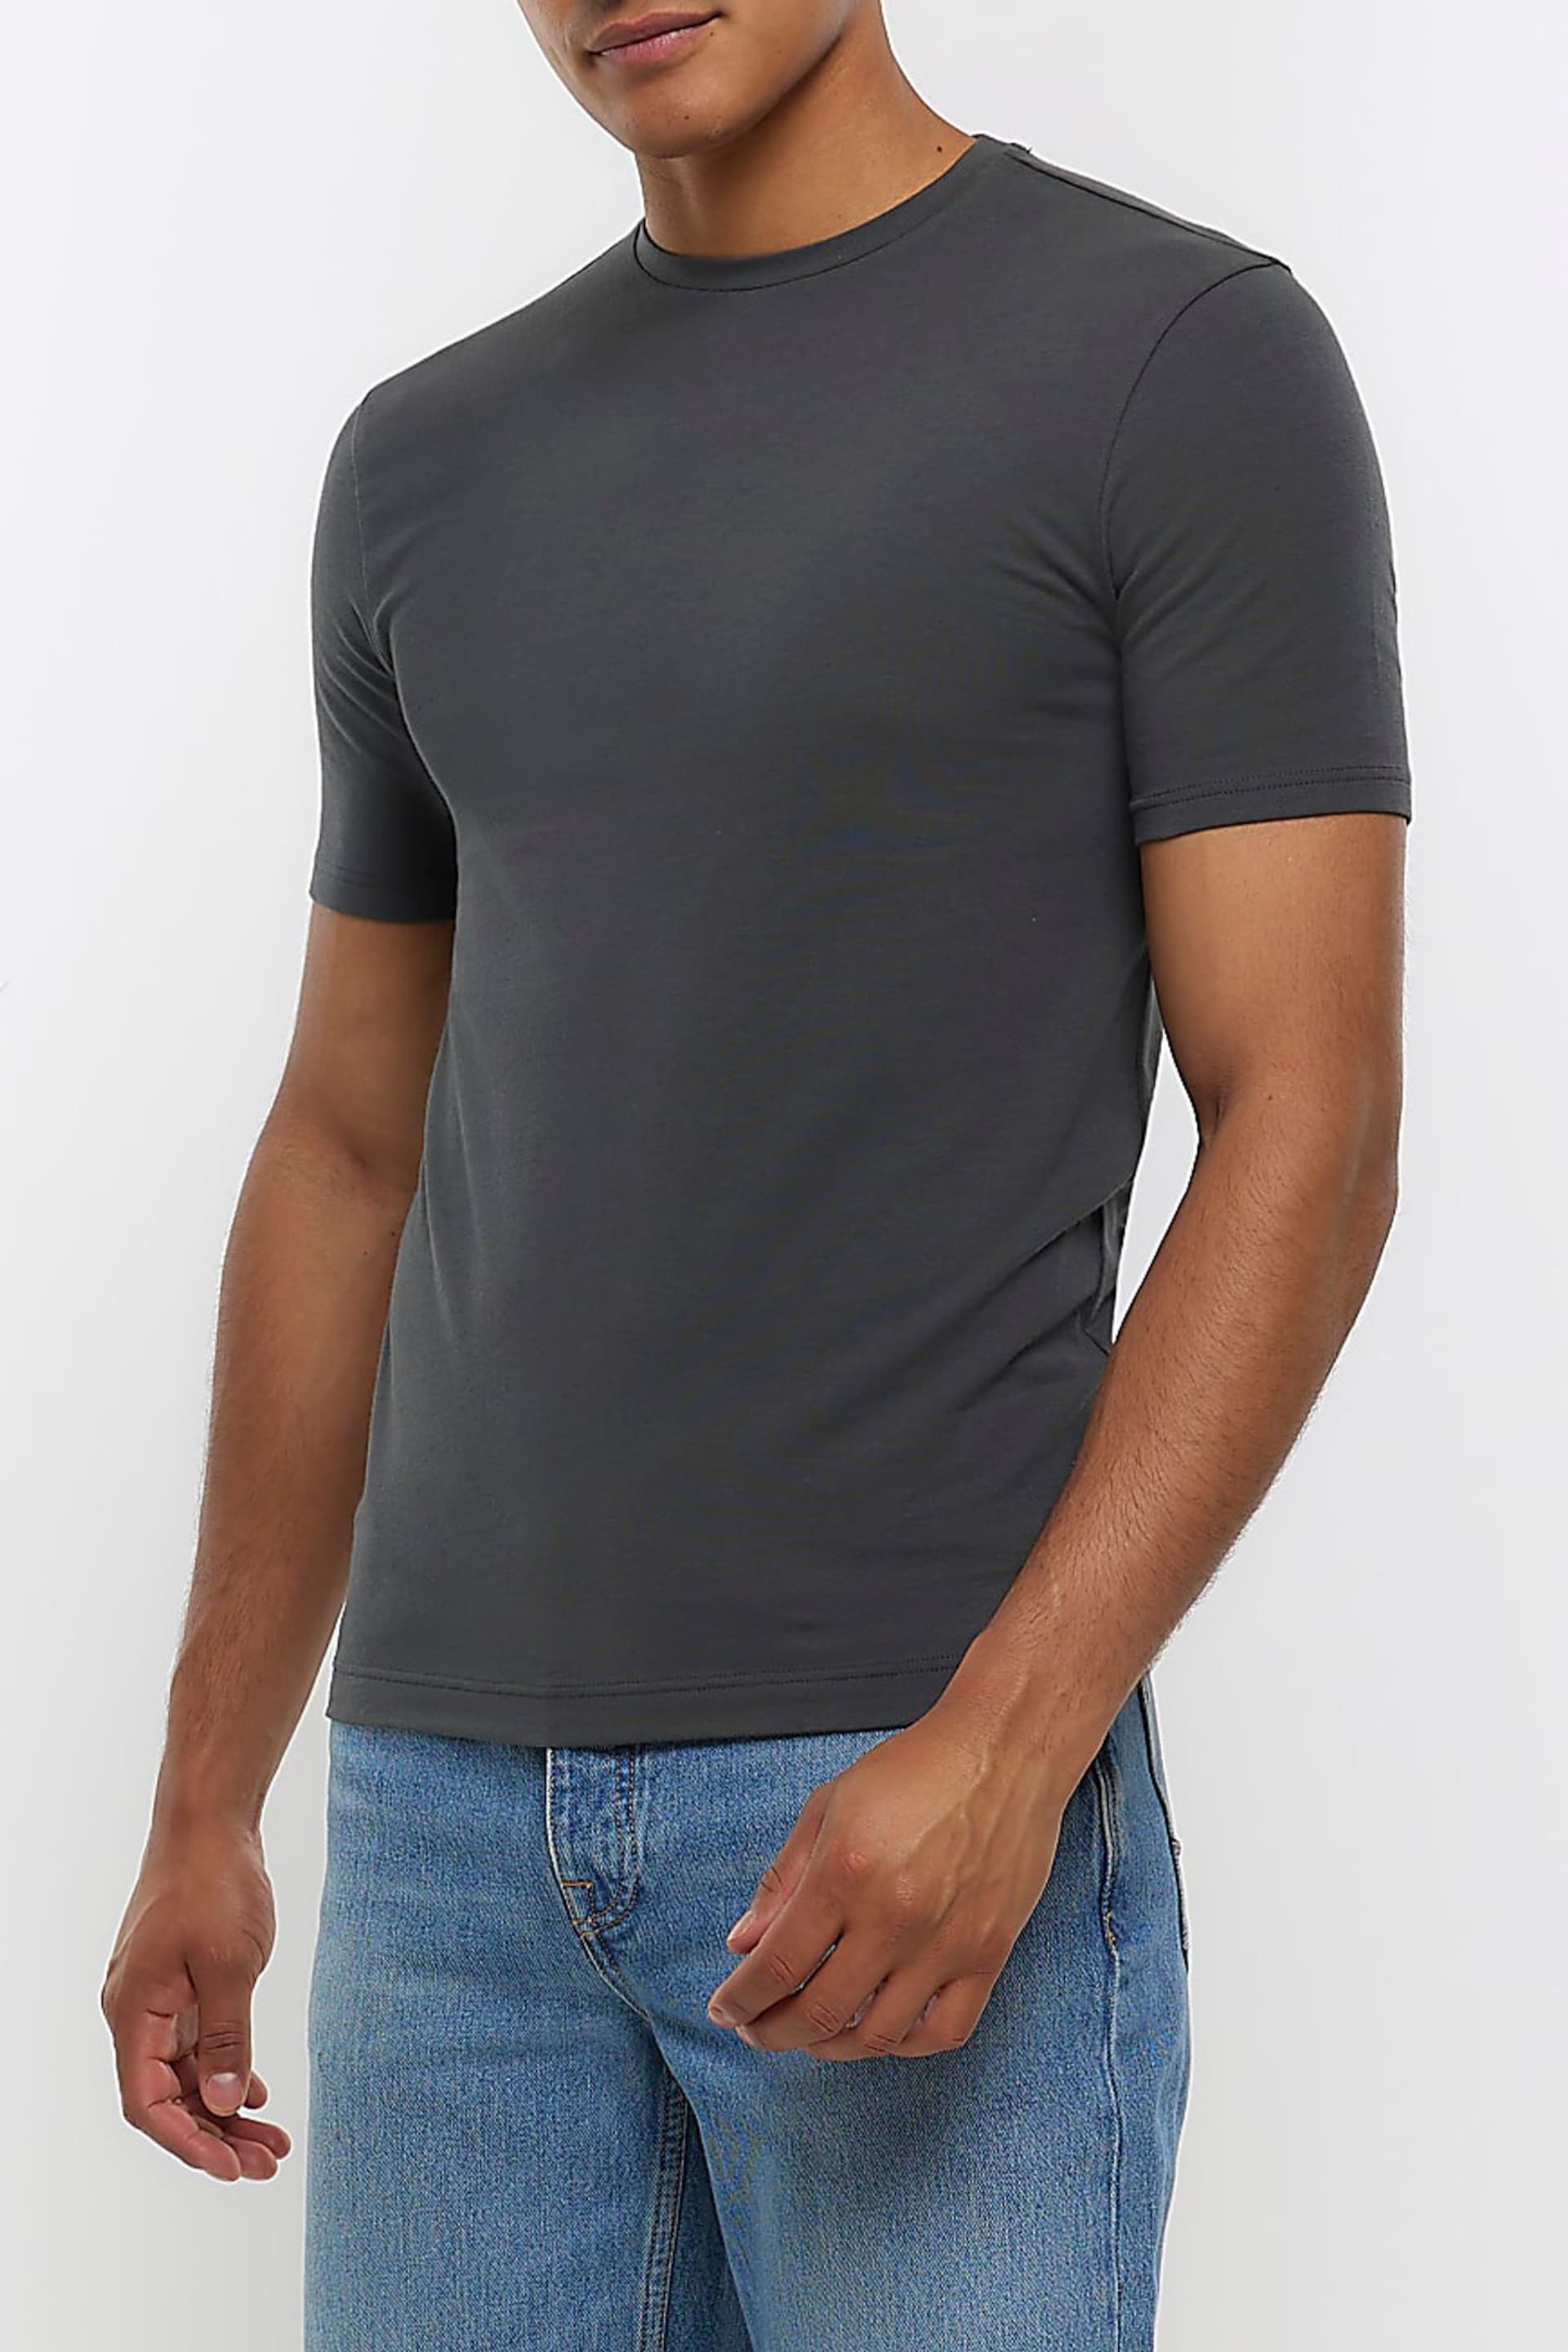 River Island Grey Muscle Fit T-Shirt - Image 1 of 6